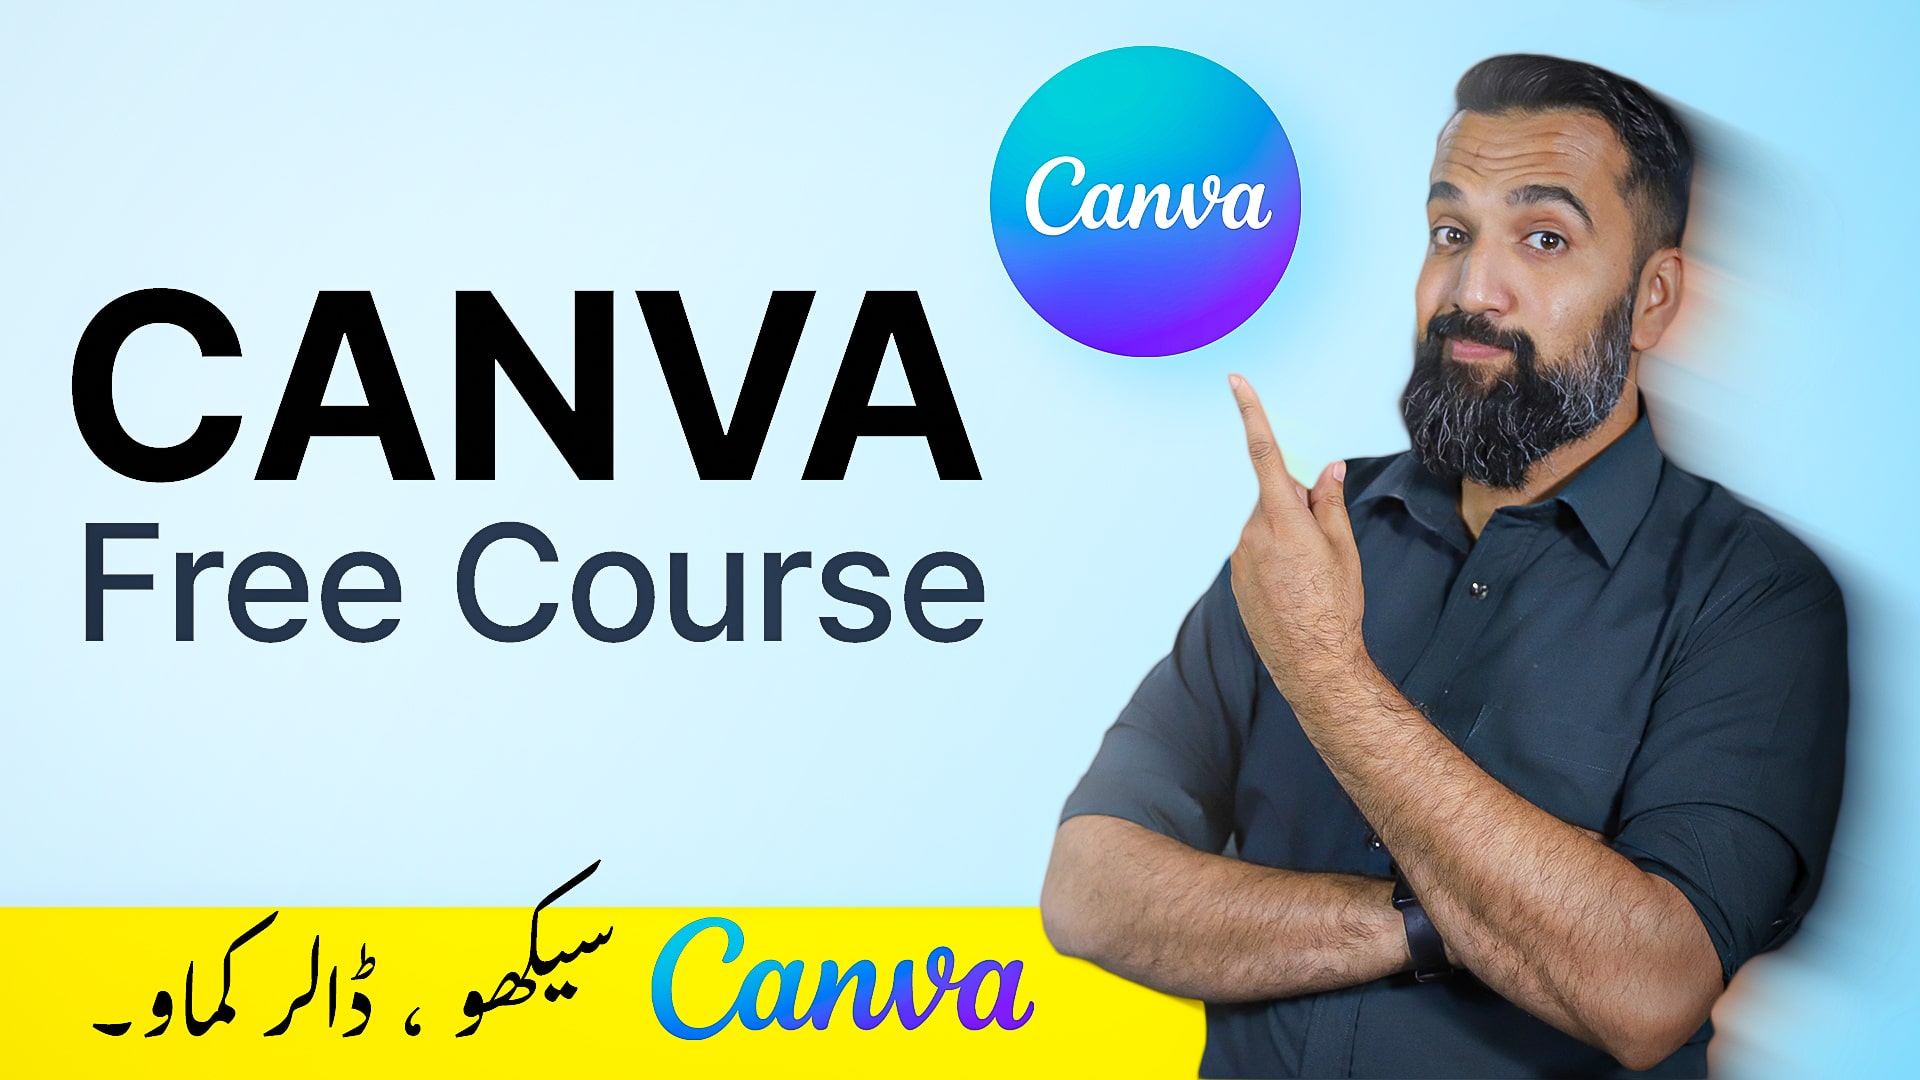  canva-course-for-beginners-graphic-designers-by-azadchaiwala-64f858e7565aa137121029.jpg 